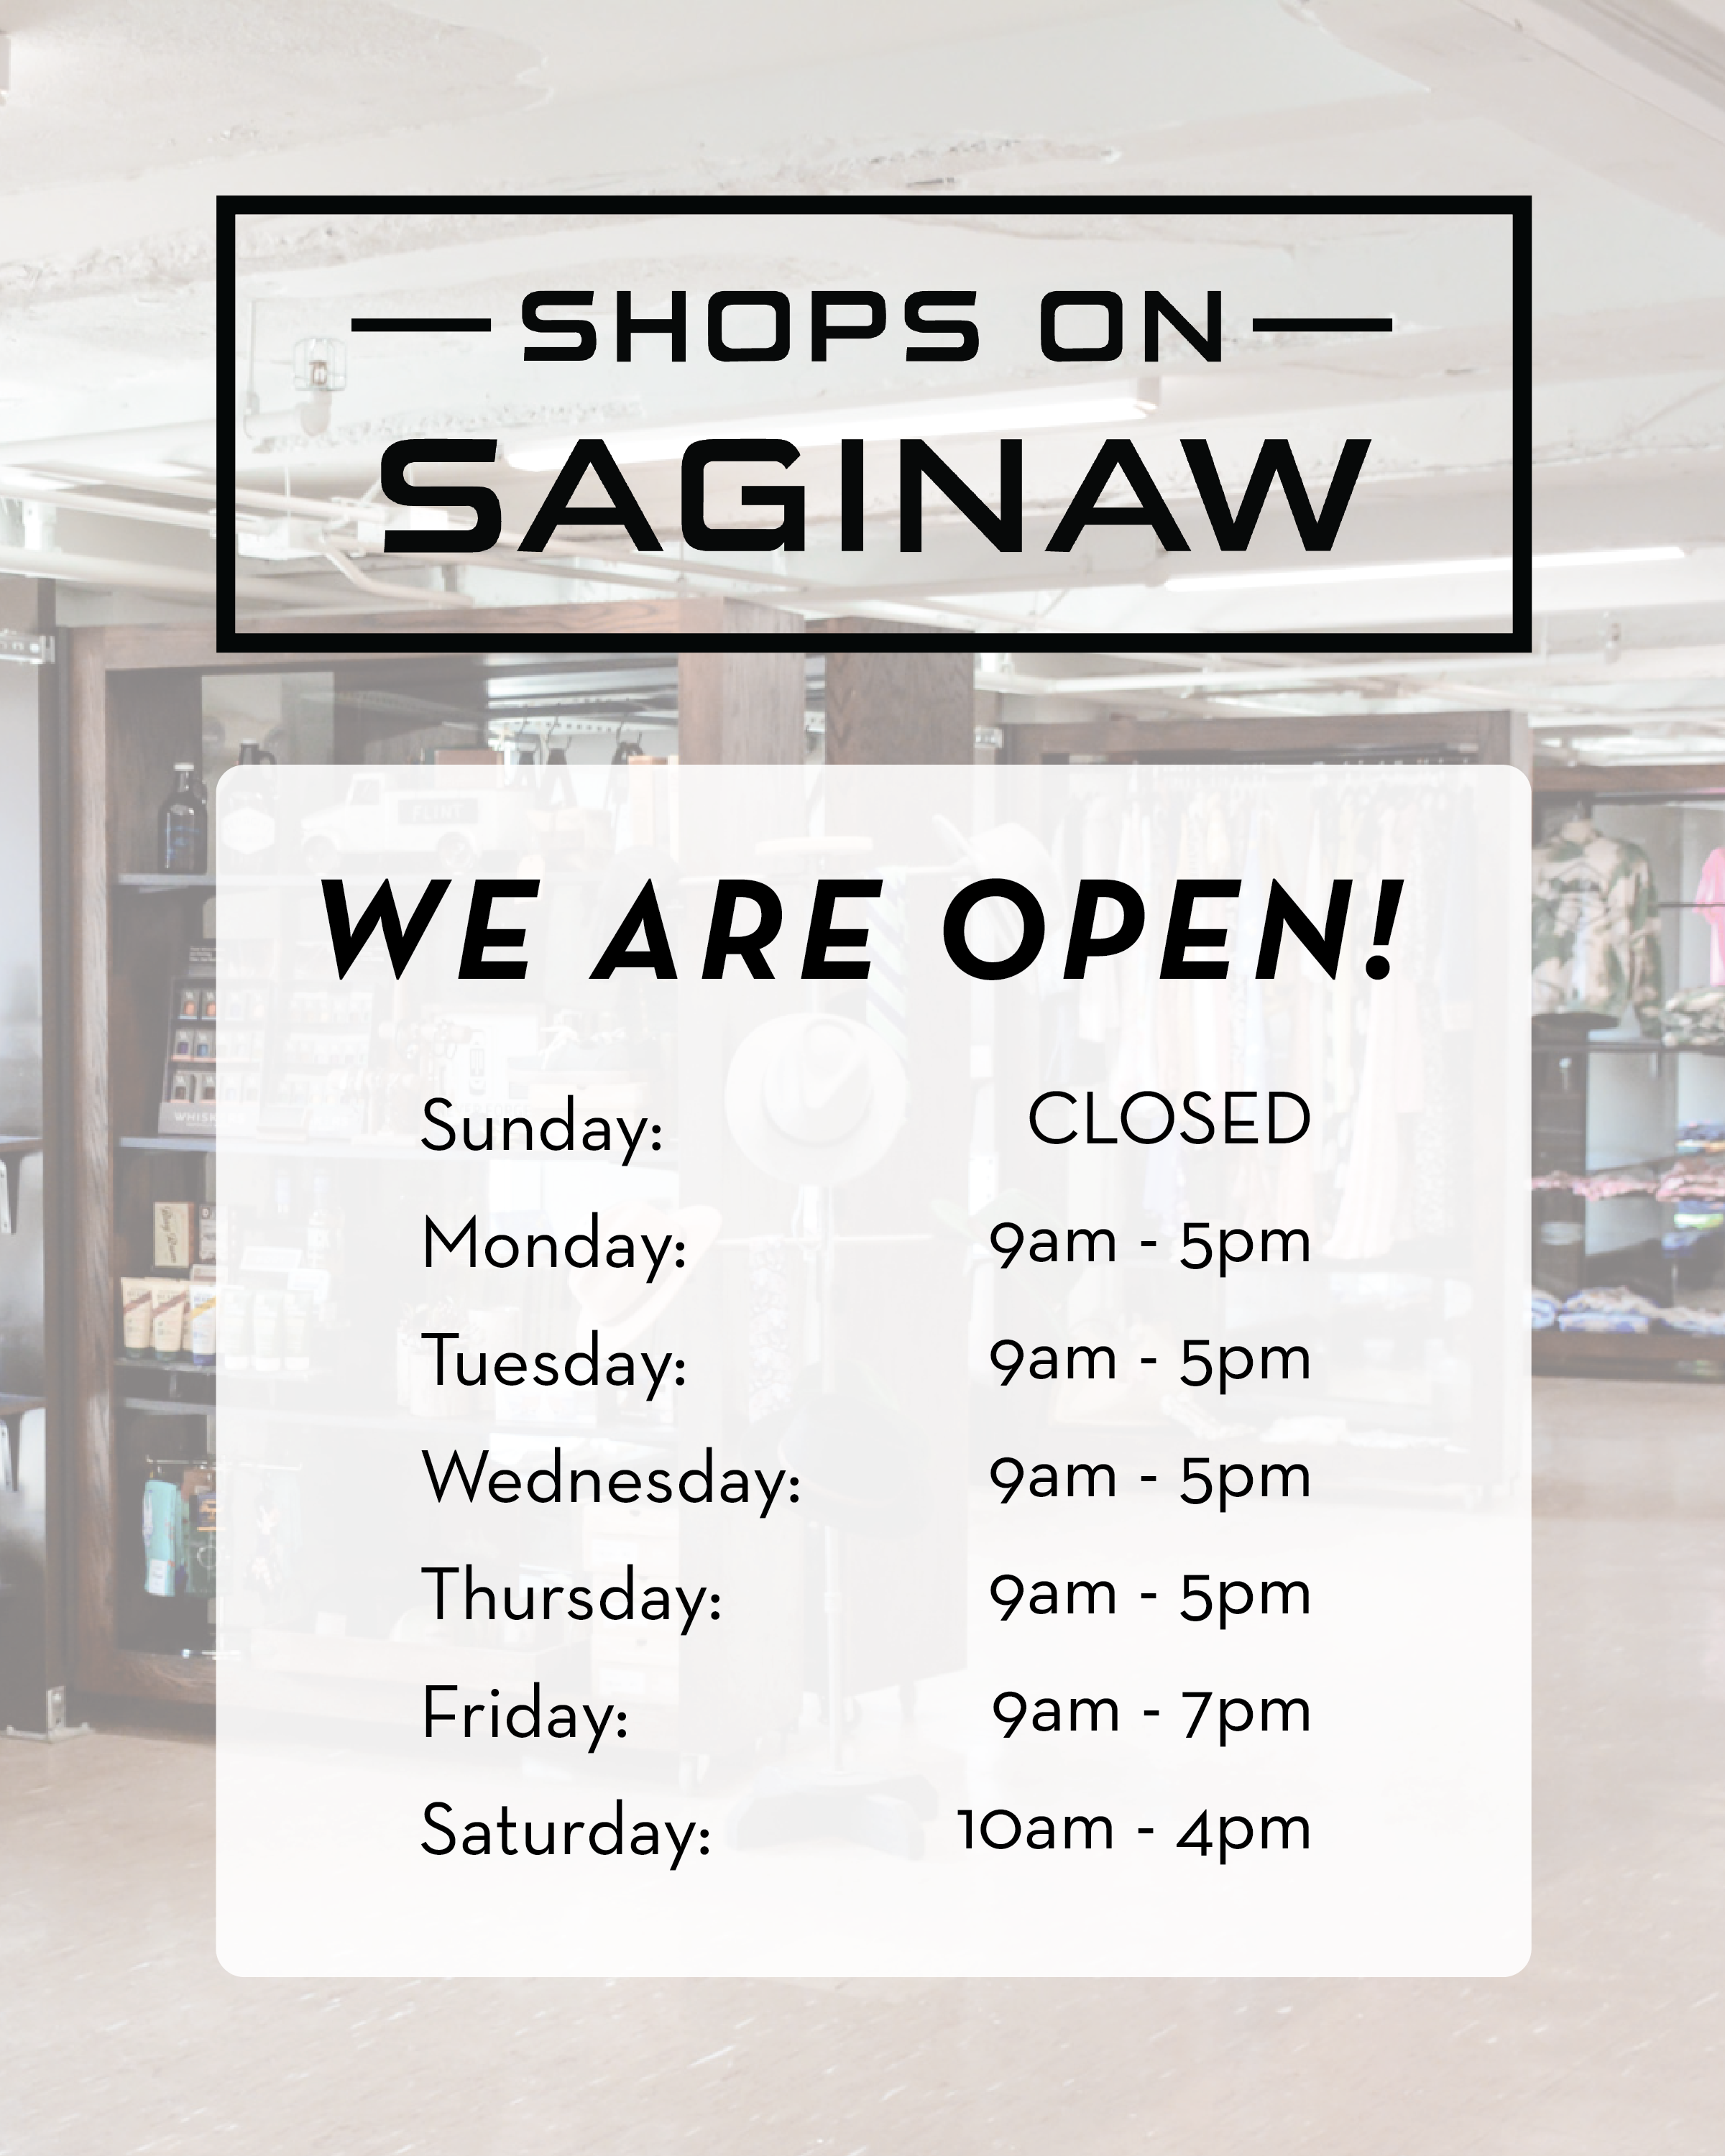 The days and hours of operation for Shops on Saginaw.